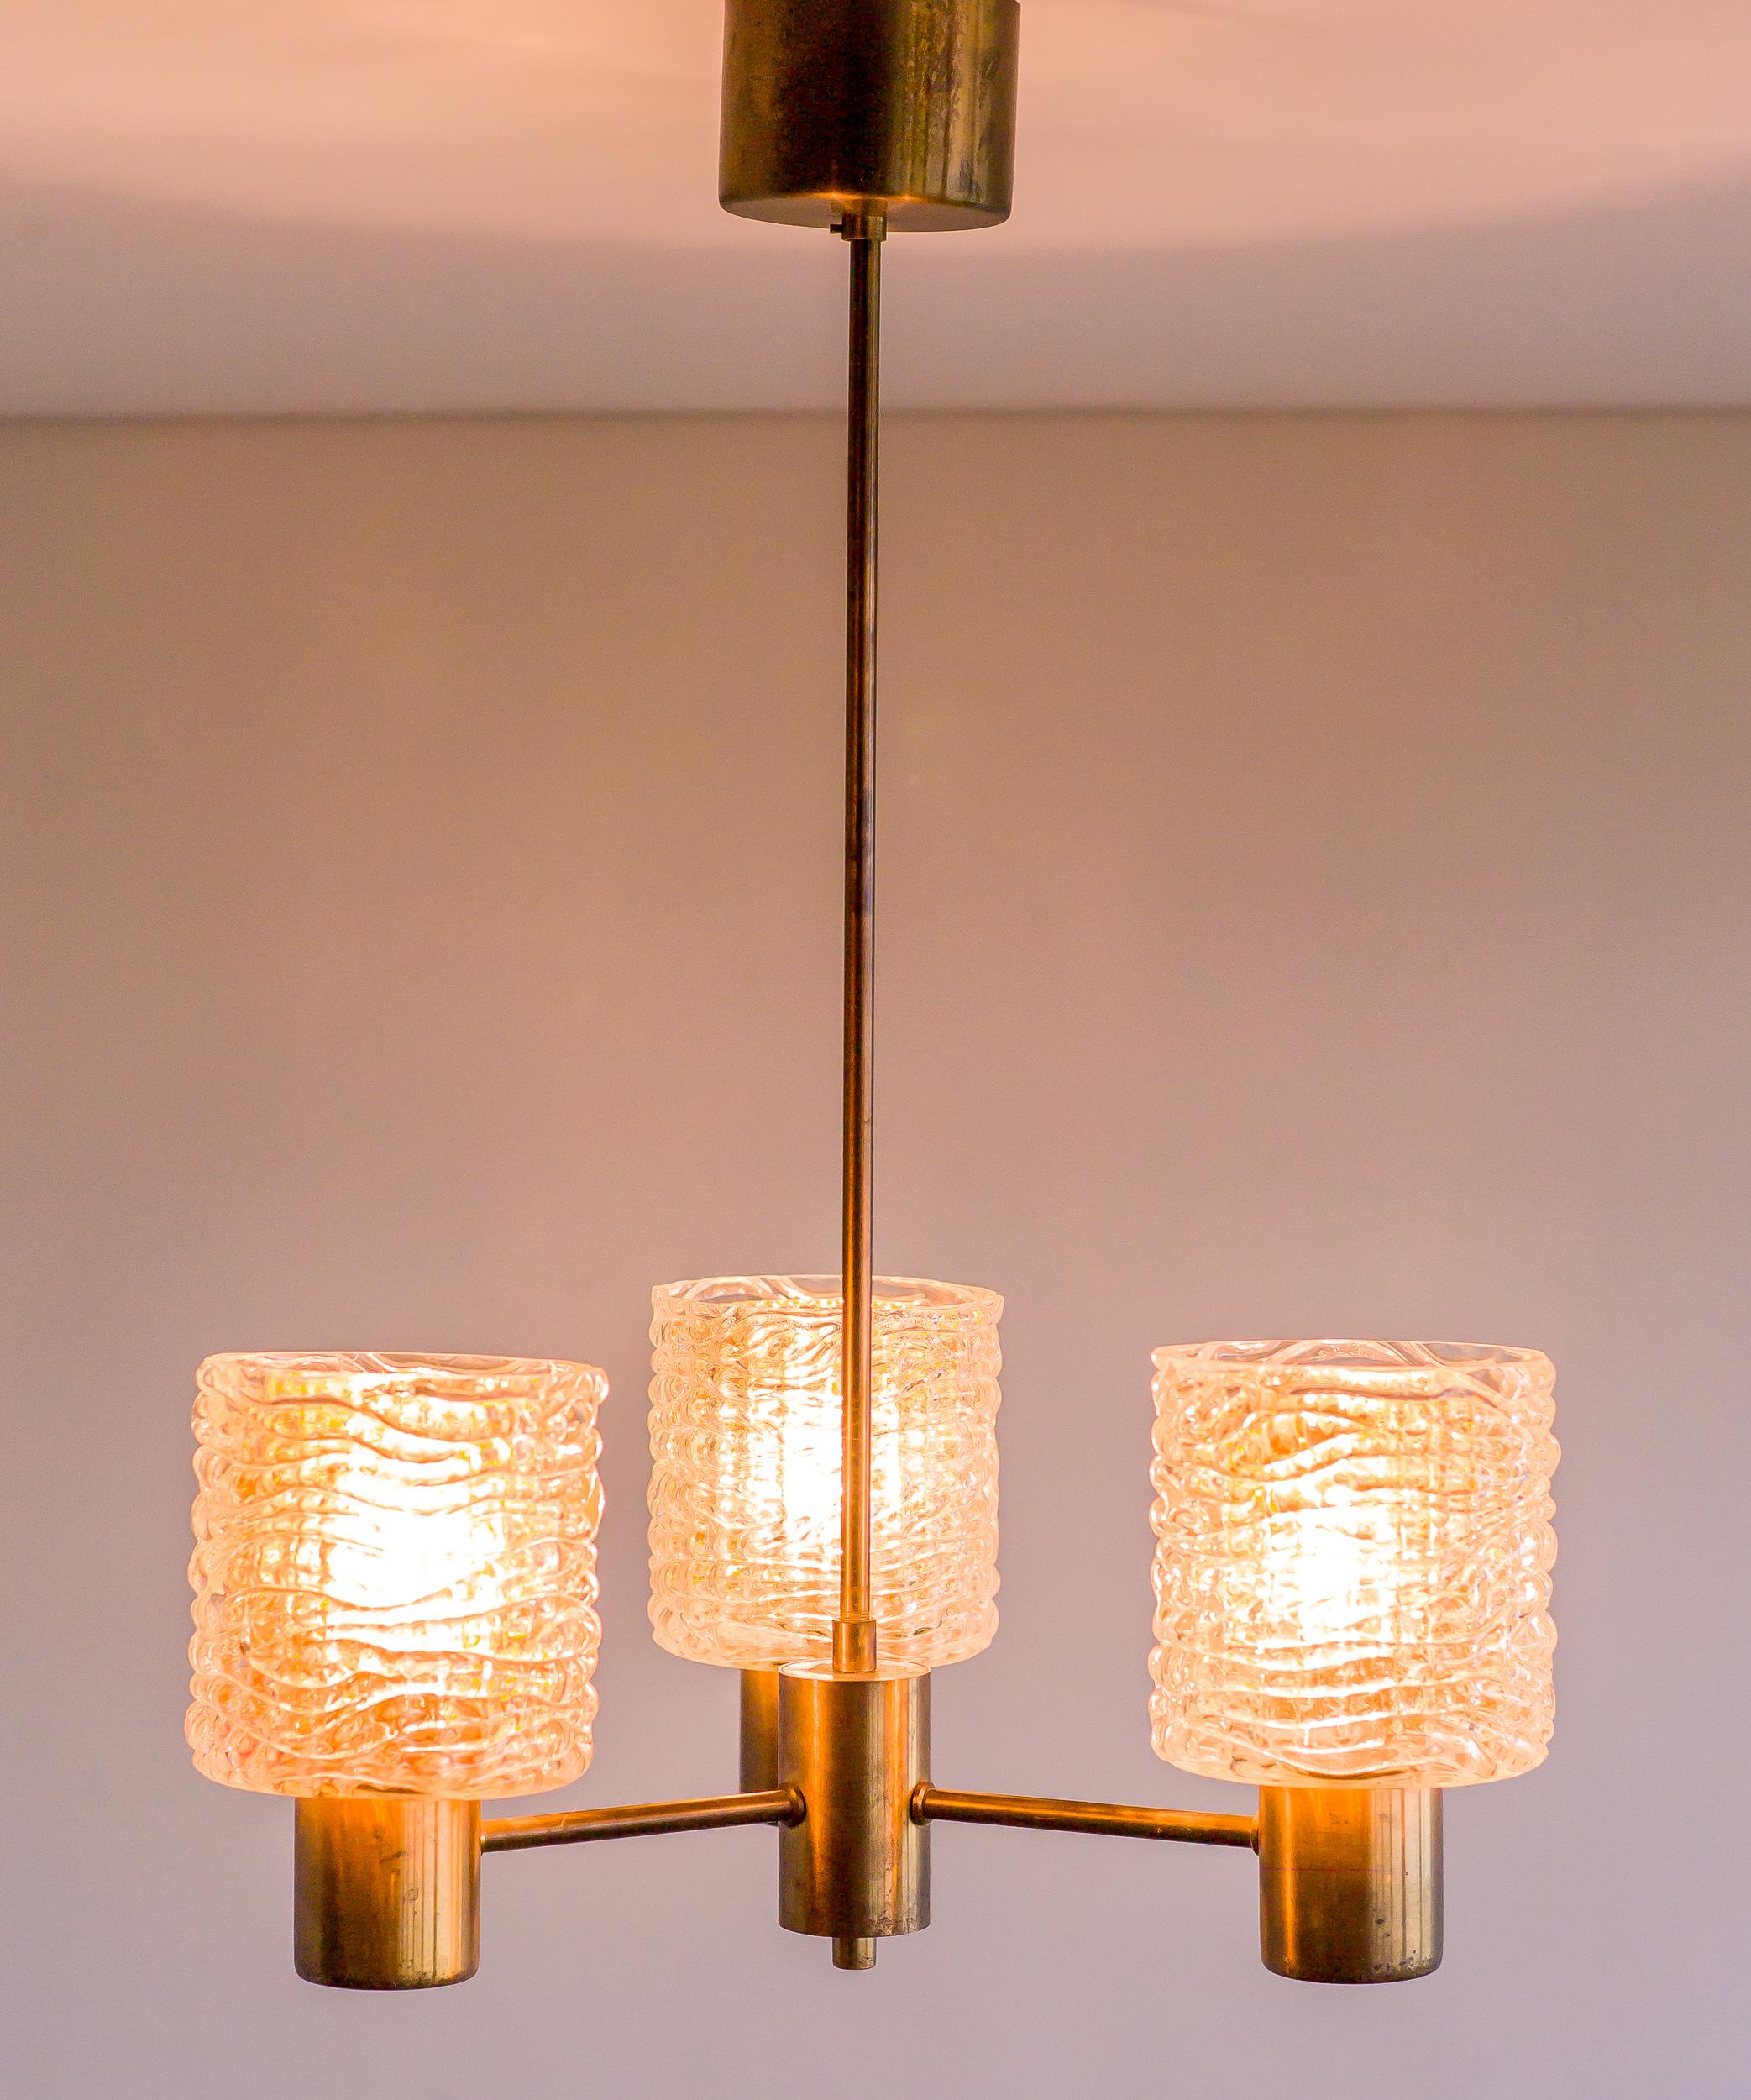 Brass chandelier with crystal shades over amber glass interior shades designed by Carl Fagerlund for Orrefors, Sweden, circa 1960s.

Many museums, churches and headquarters of large companies house the work of Scandinavian modernist lighting